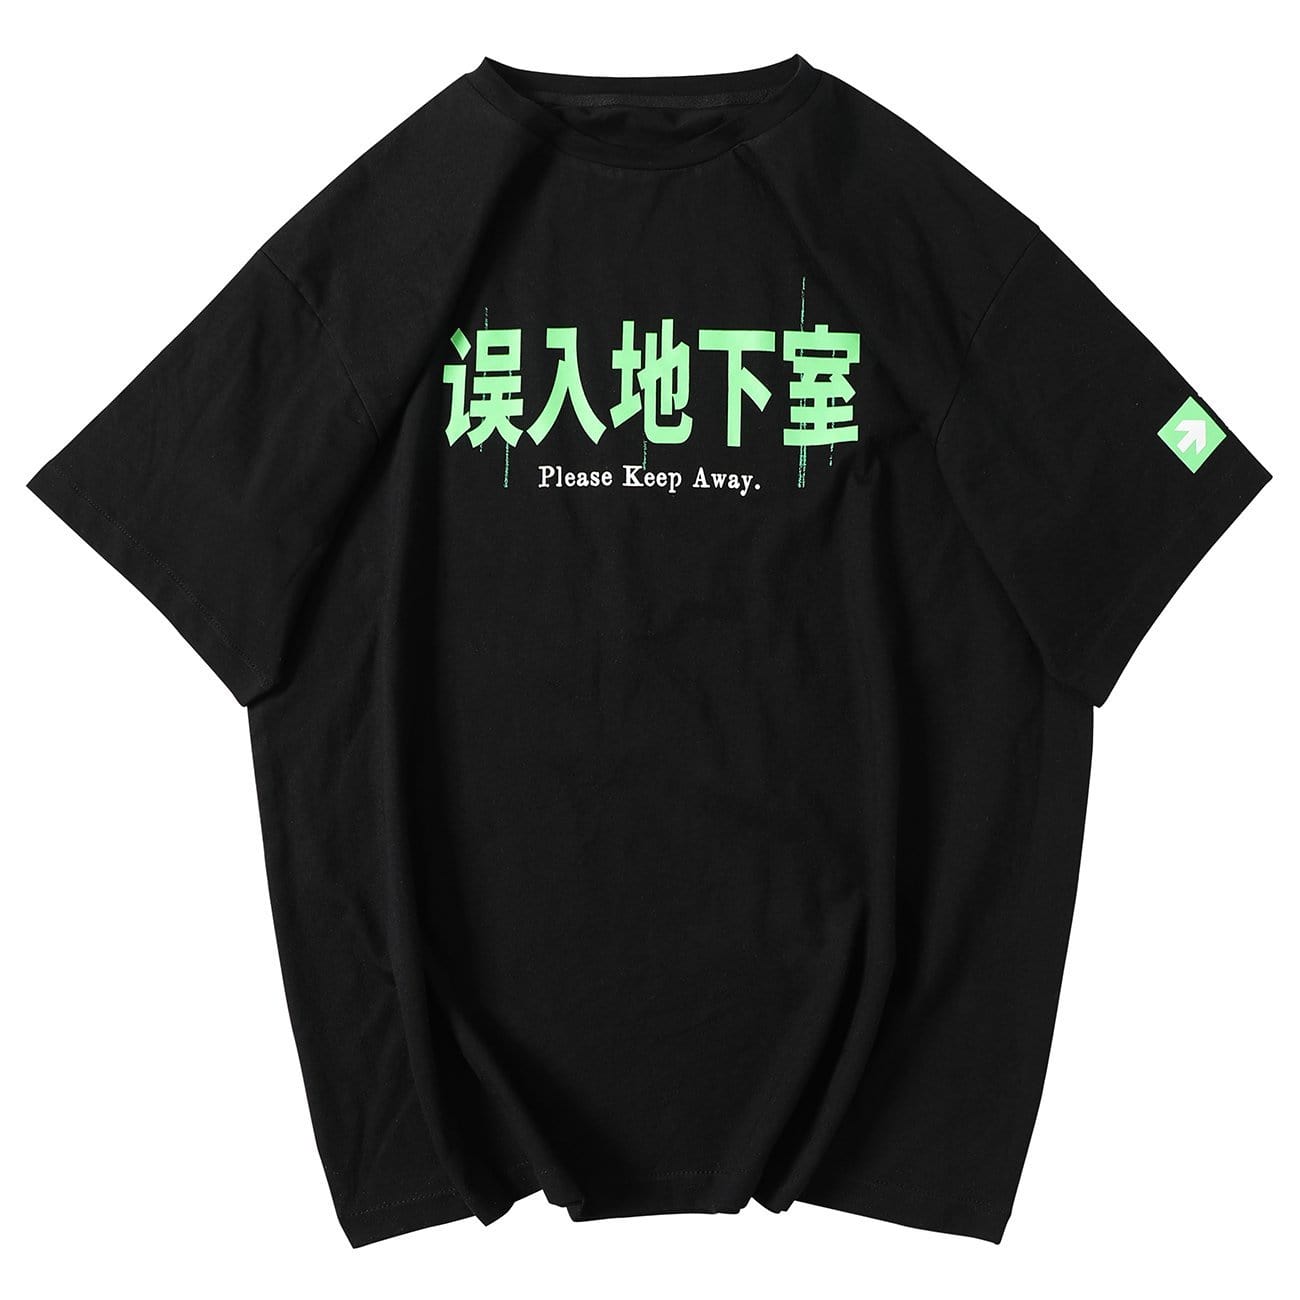 Glowing Letter Print T-Shirt